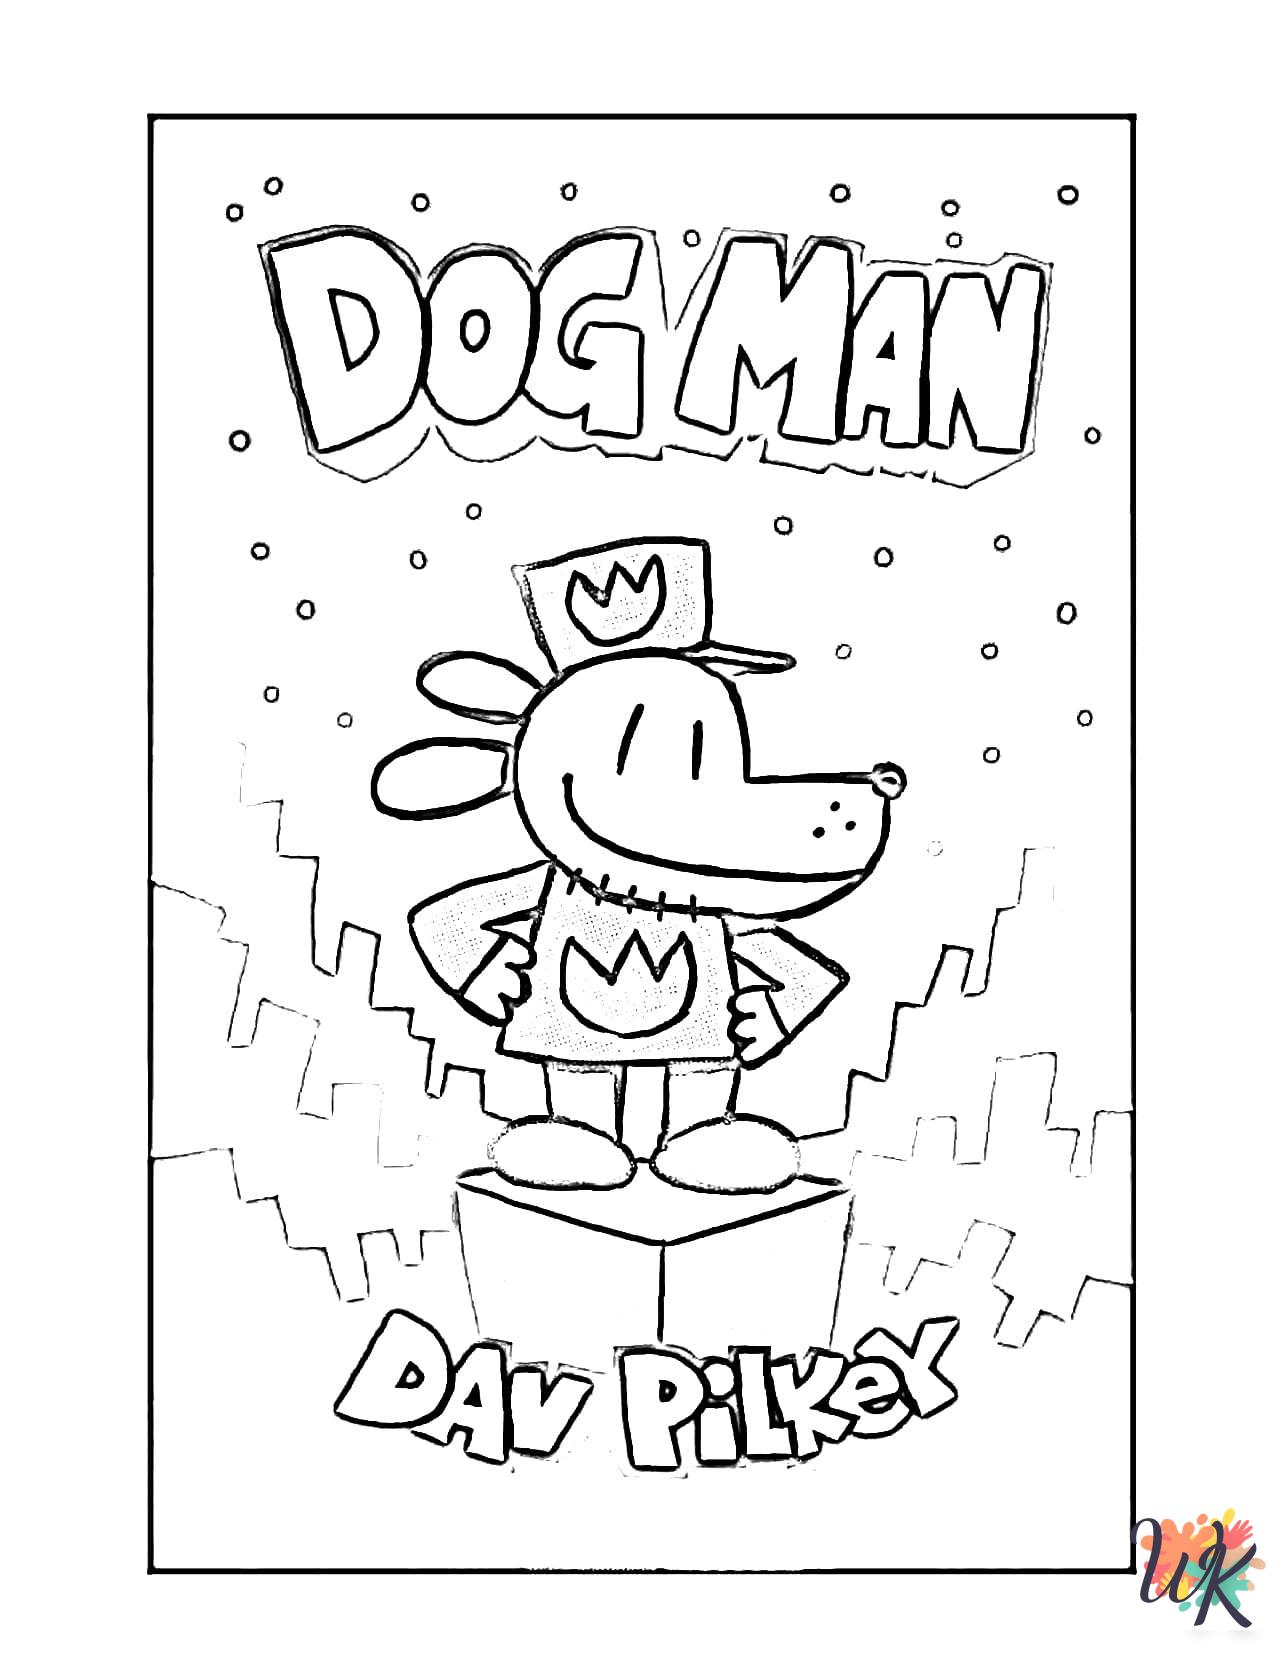 free Dog Man coloring pages for adults